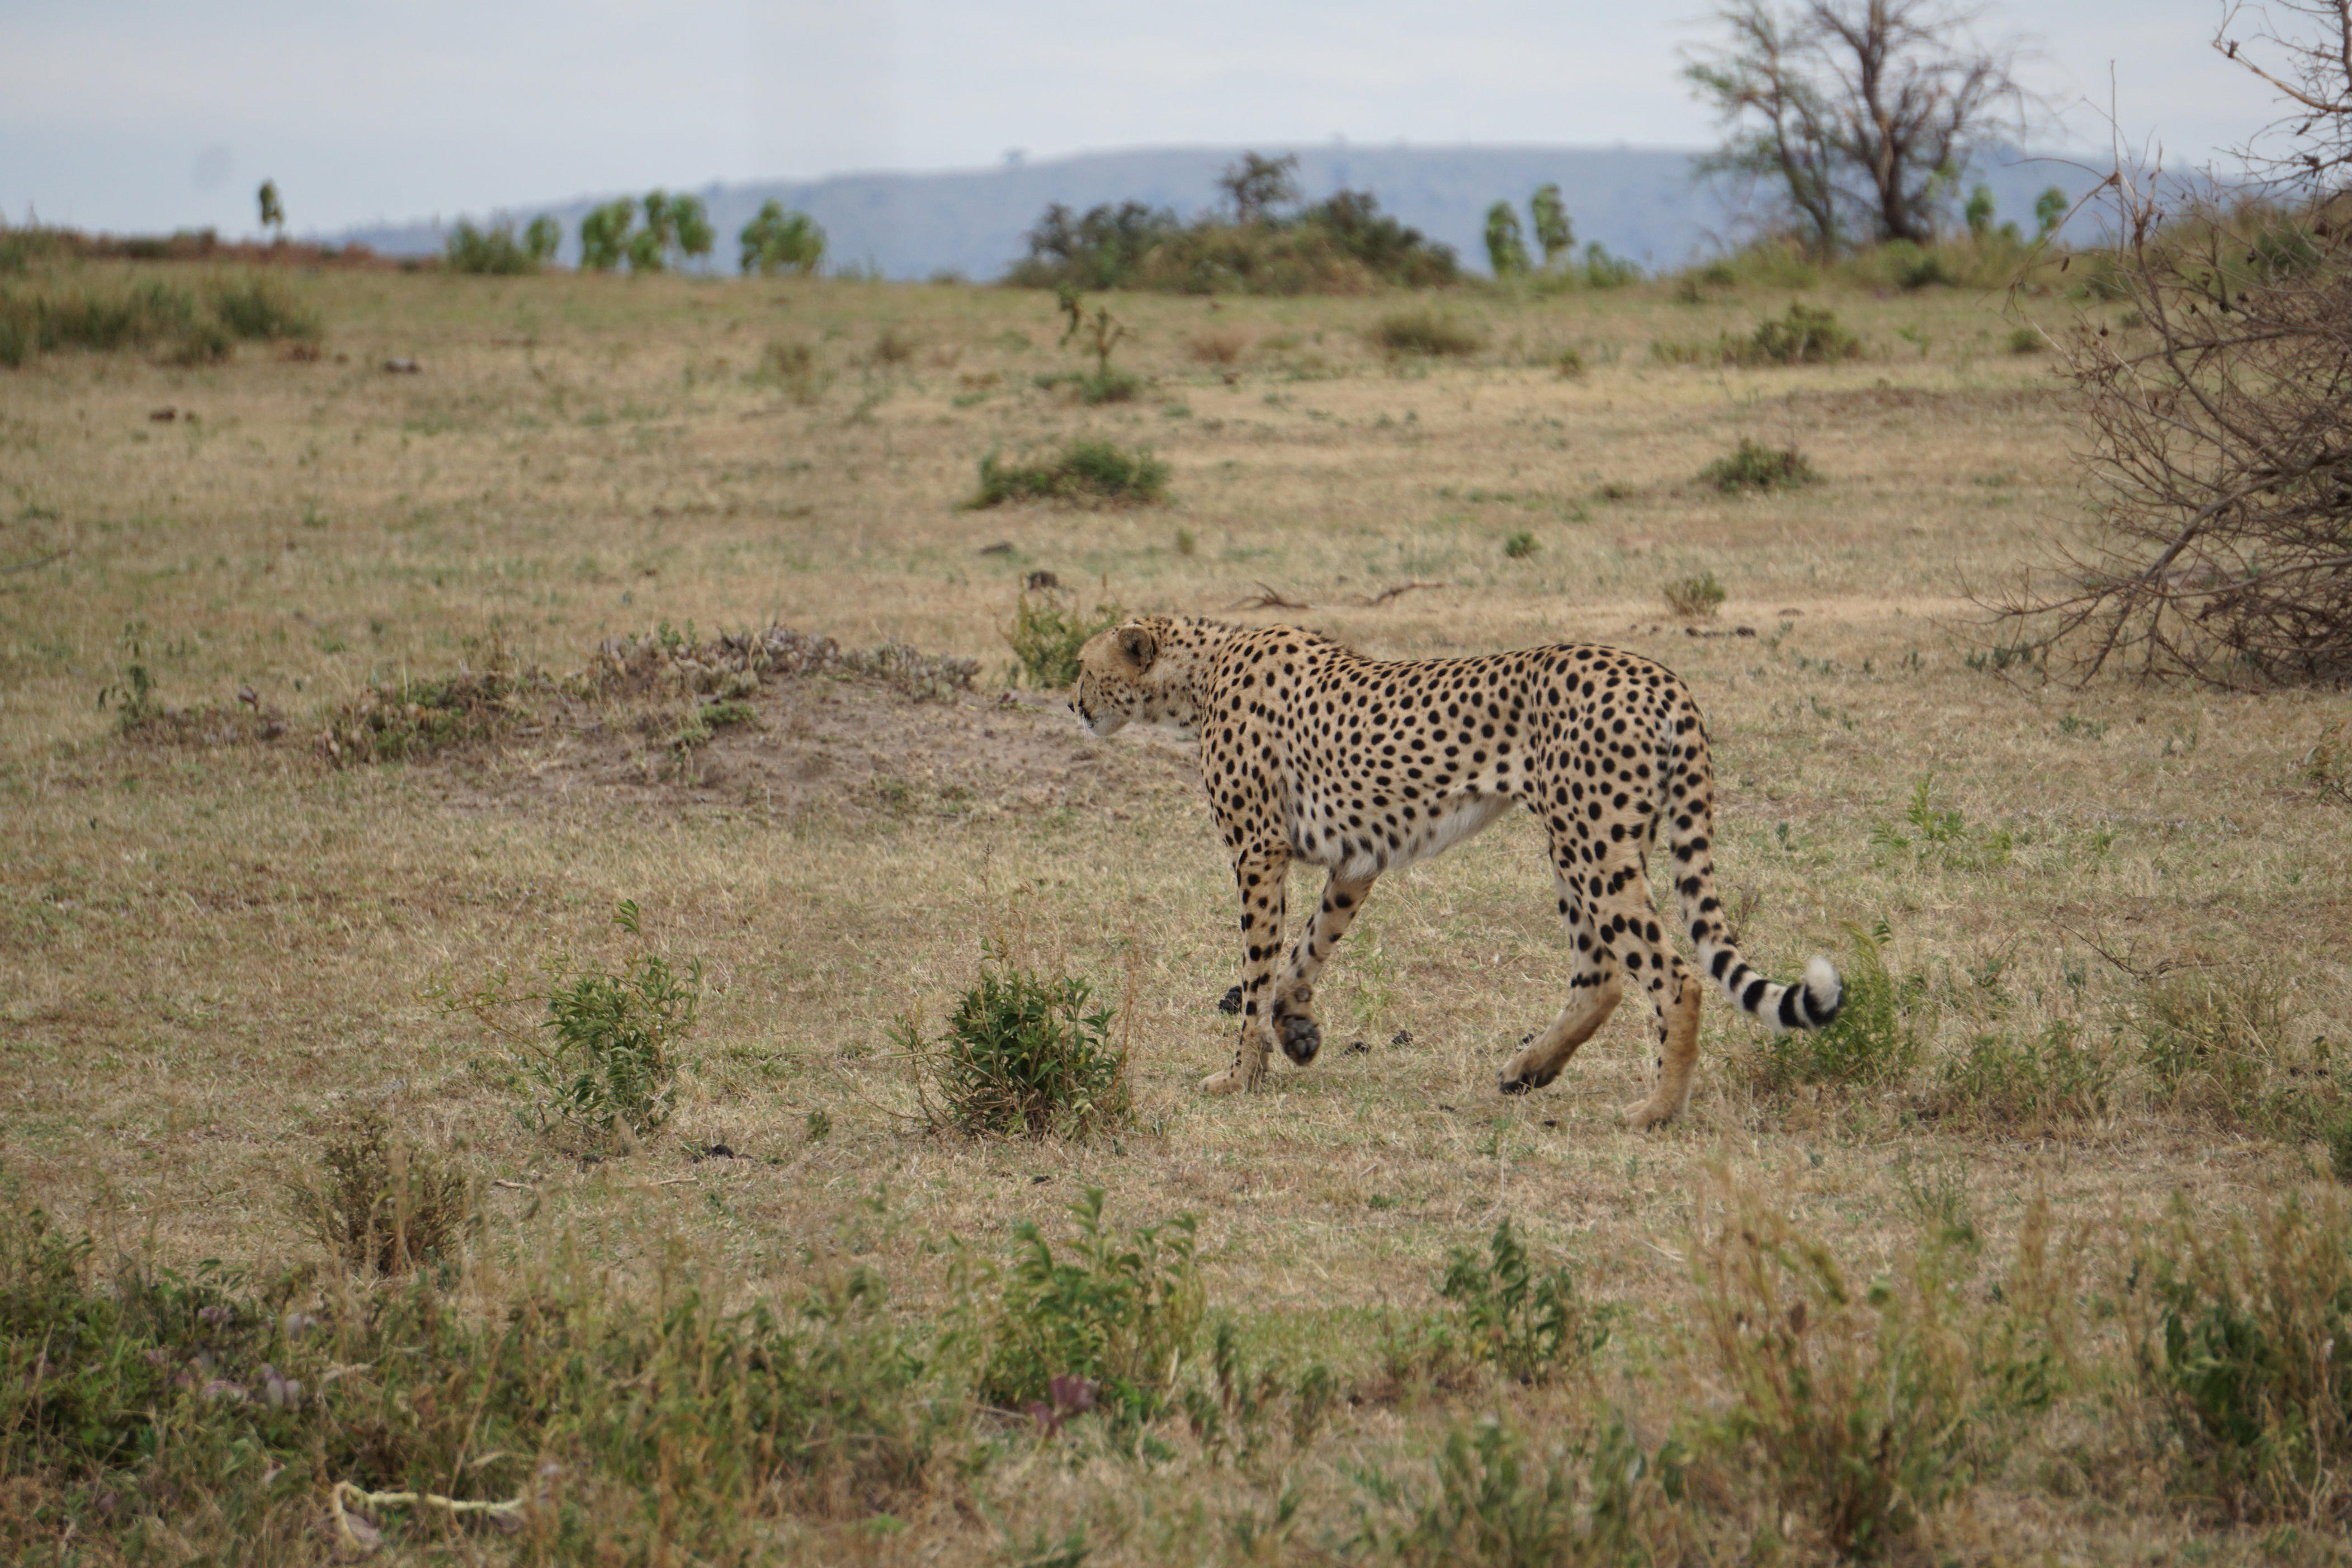 <p>In my opinion, the difference between these two safari trips that's the most worth paying for is being in a private reserve.</p><p>After all, the main reason I <a href="https://www.businessinsider.com/africa-vacation-travel-warnings-us-state-department-2019-6">fly to Africa</a> is for the safari, not the glamping.</p><p>I much preferred my lodging at Taasa, mostly because of the bathroom. But if I hadn't had the 50% off deal, I'm not sure the full price would've been worth it. </p><p>Still, it was a wonderful experience, and if I had more money, I may feel differently. Even so, the budget glamping was pretty comfortable and just fine for a week.</p><p>But again, as far as the safari experience goes, the private reserve is hard to beat. Being able to go offroading and get closer to the animals is quite the experience.</p><p>And if luxurious lodges are out of the question, private reserves can also be visited more affordably. Some lodges inside private reserves, like Shindzela or Rhino River Lodge, can cost around $250 per person per night.</p>